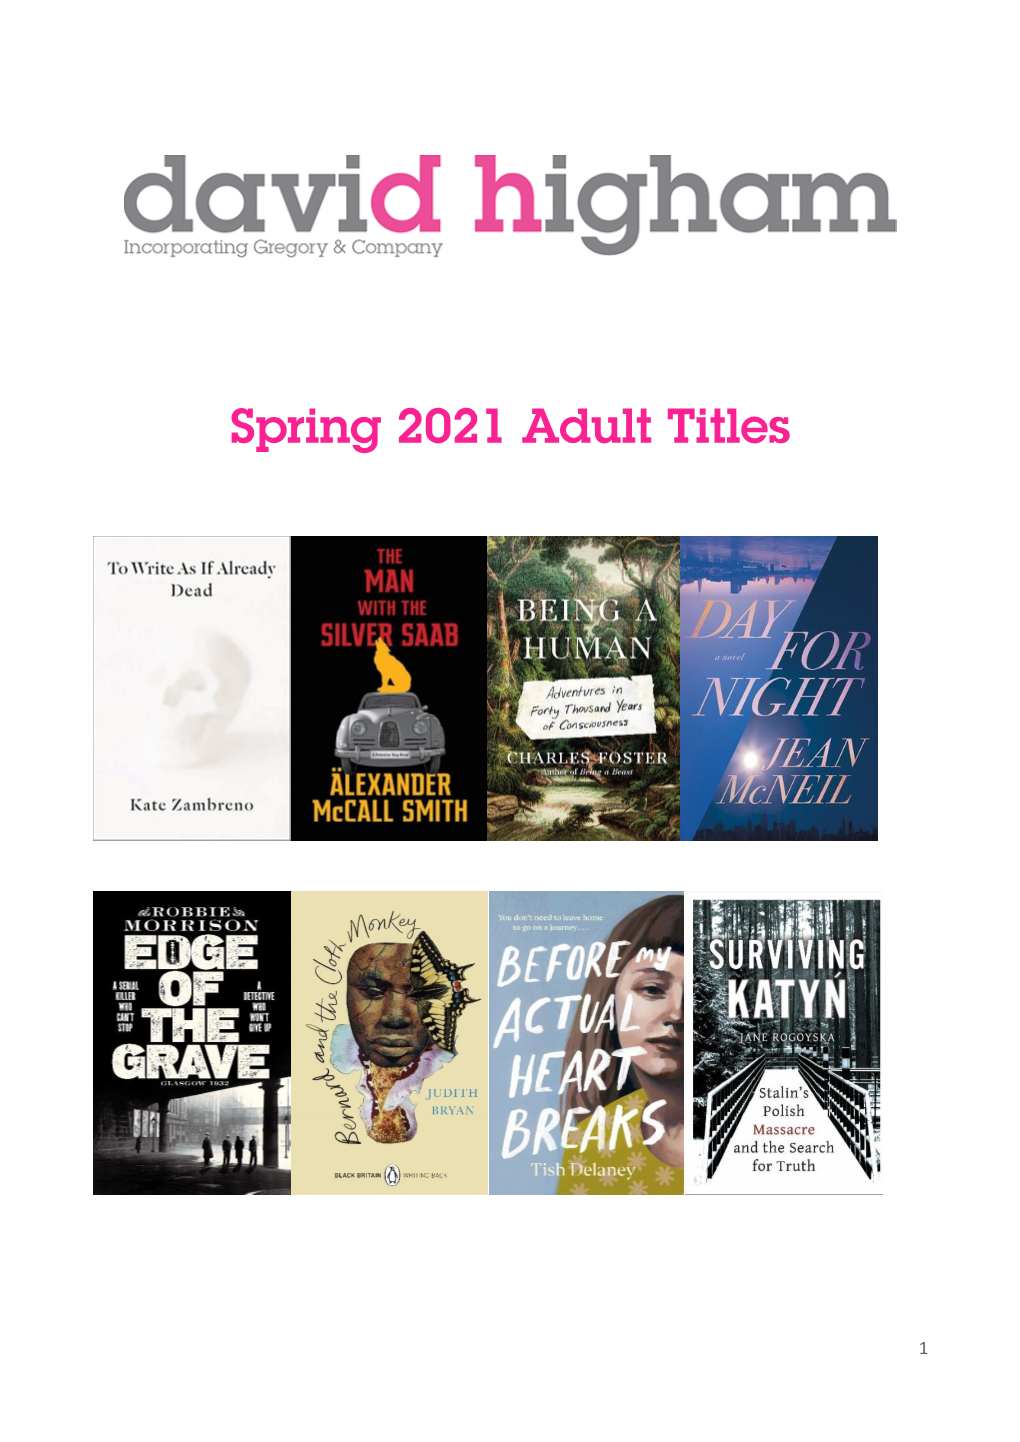 2021 Spring Adult Rights Guide